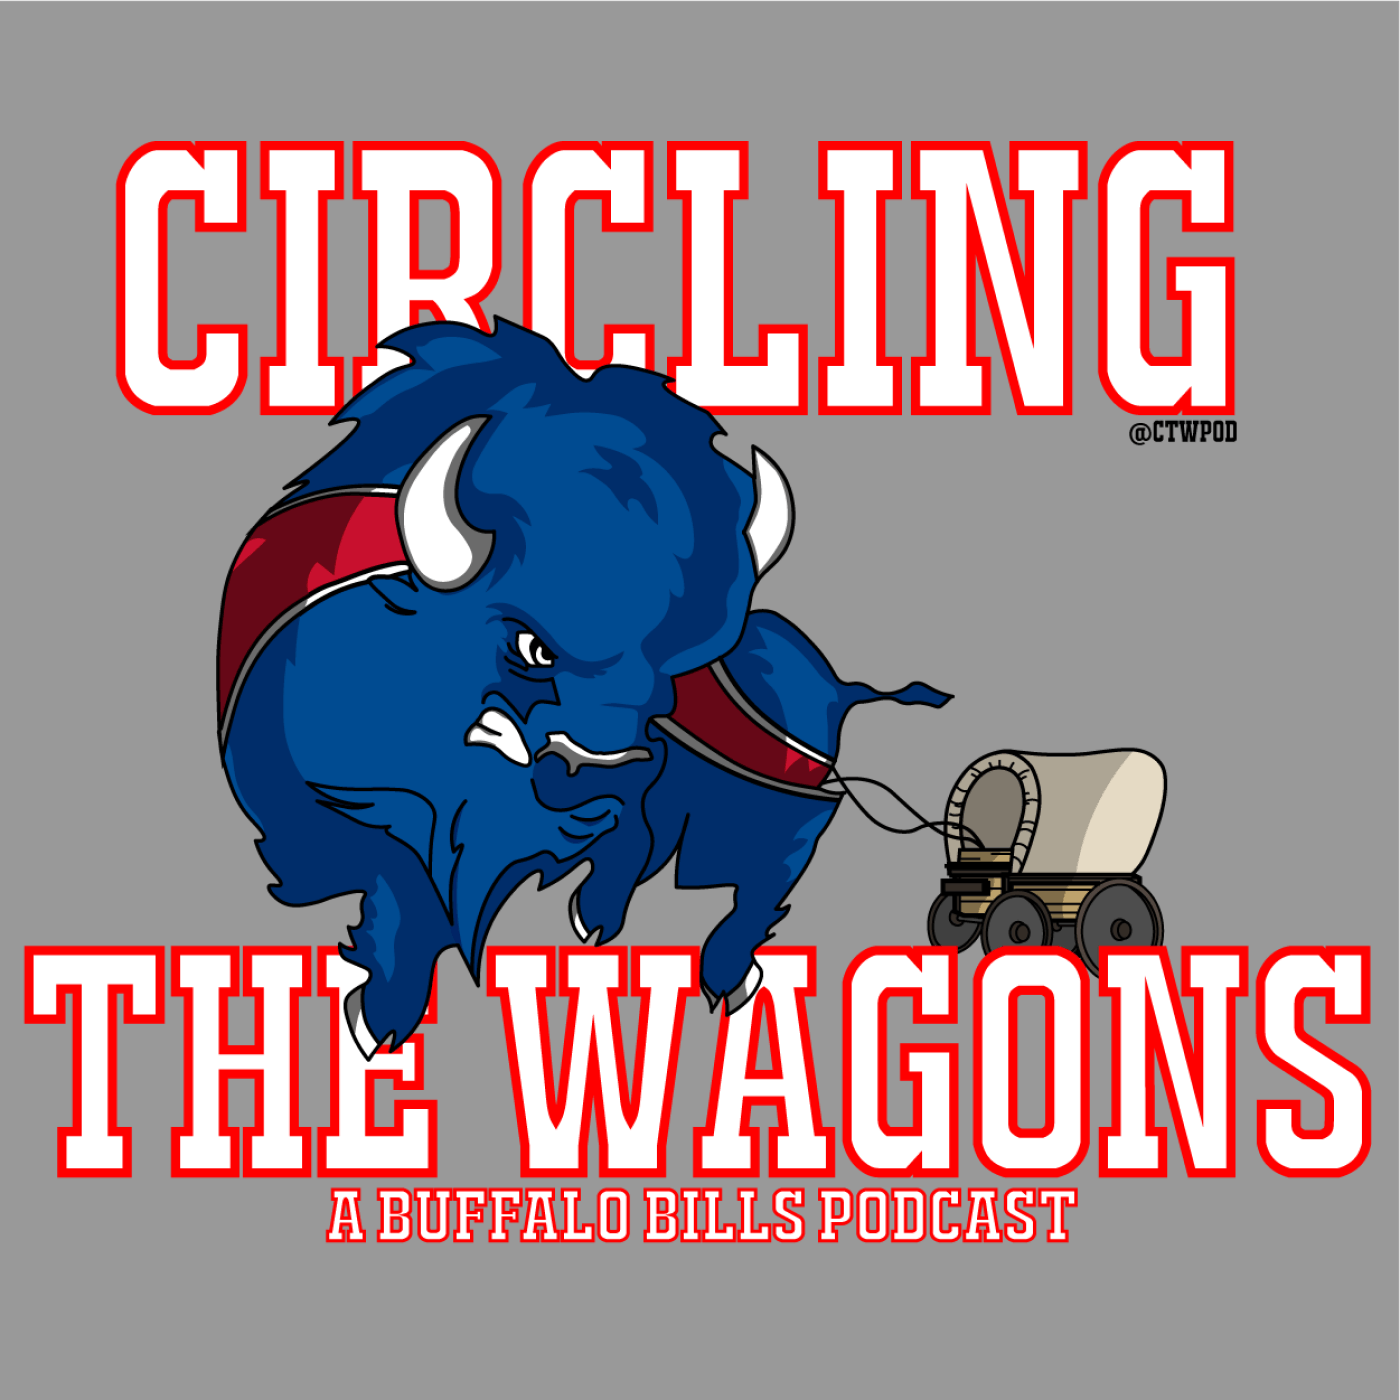 Circling the Wagons: Game of Thrones Series Finale & Buffalo Bills Part 1